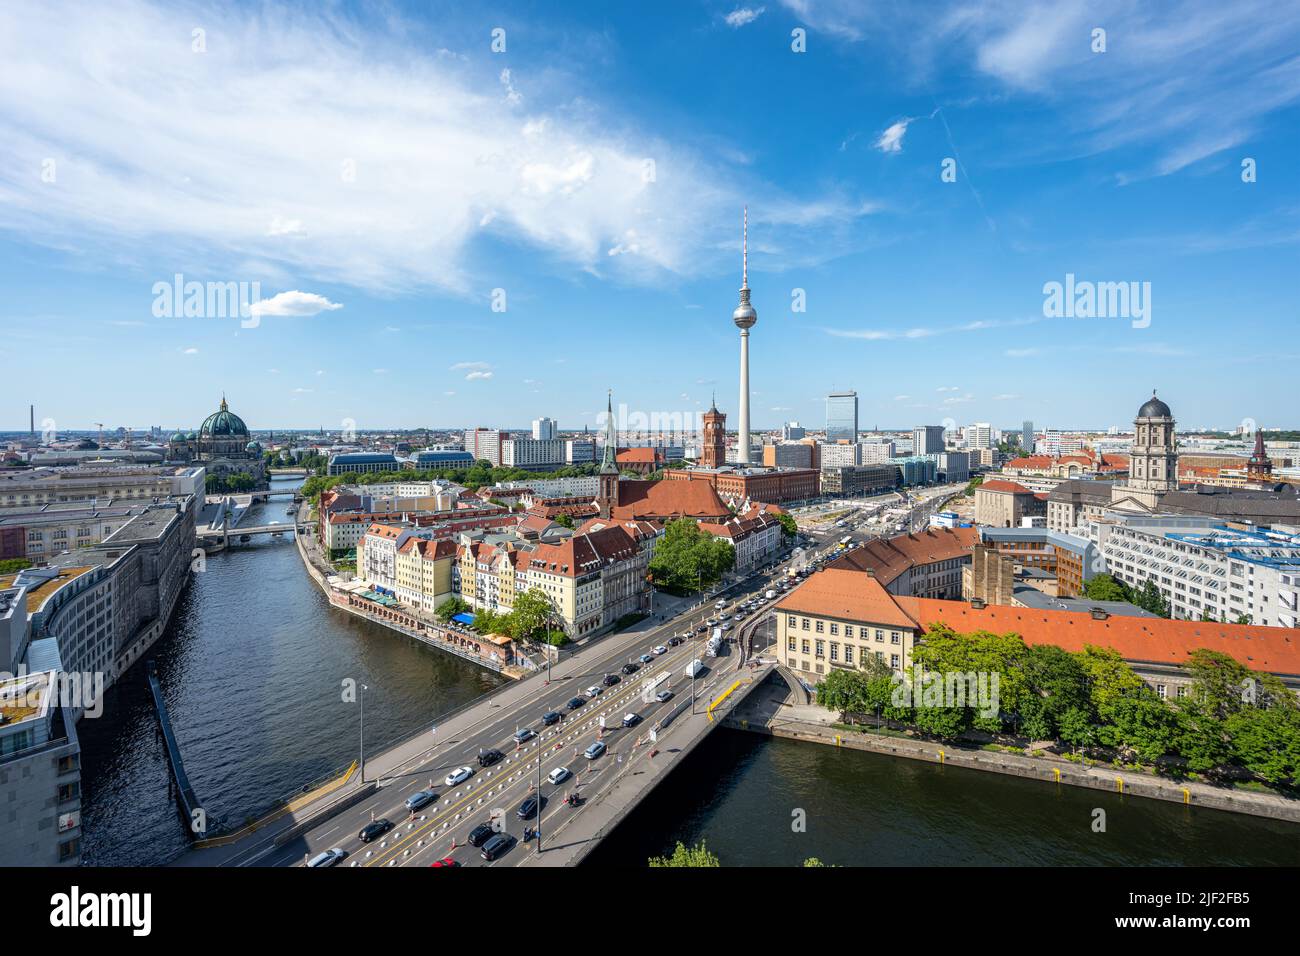 View of Central Berlin with the famous TV Tower and the Spree river on a sunny day Stock Photo